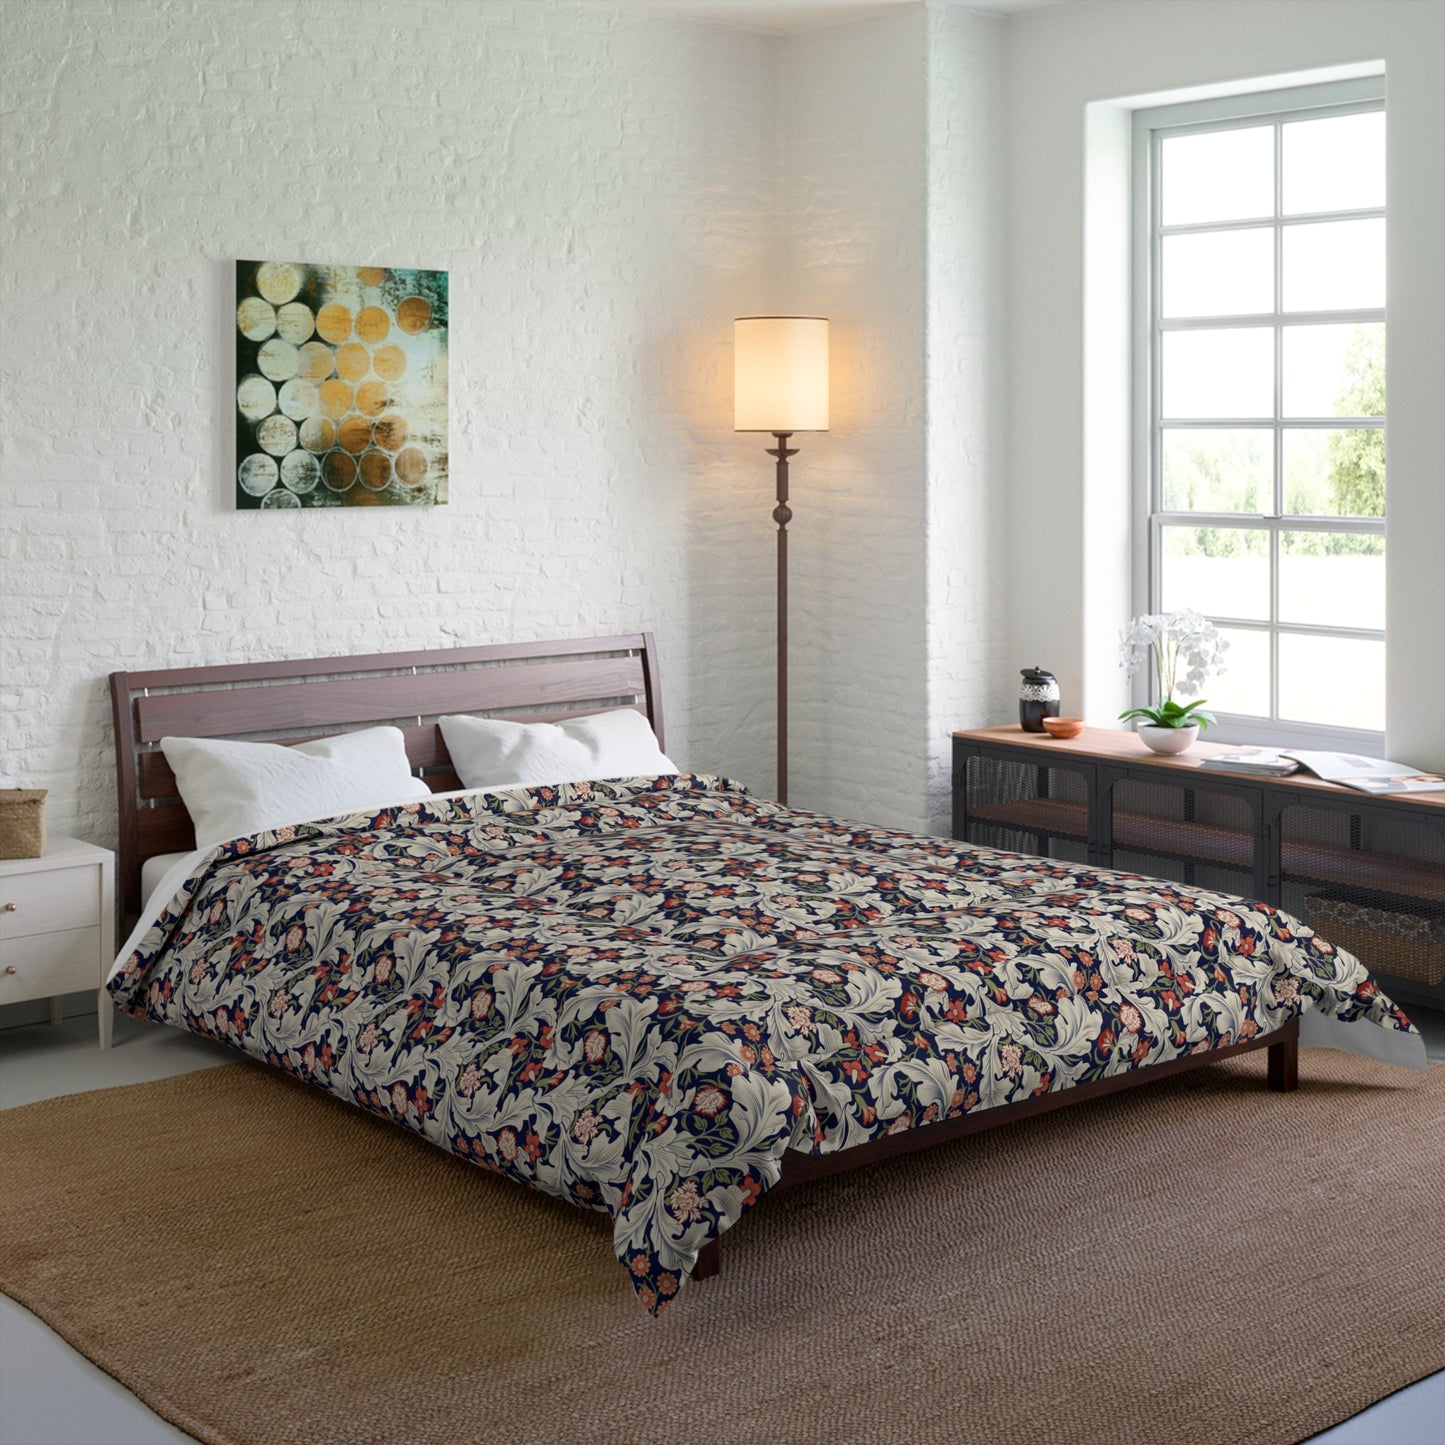 william-morris-co-comforter-leicester-collection-royal-1